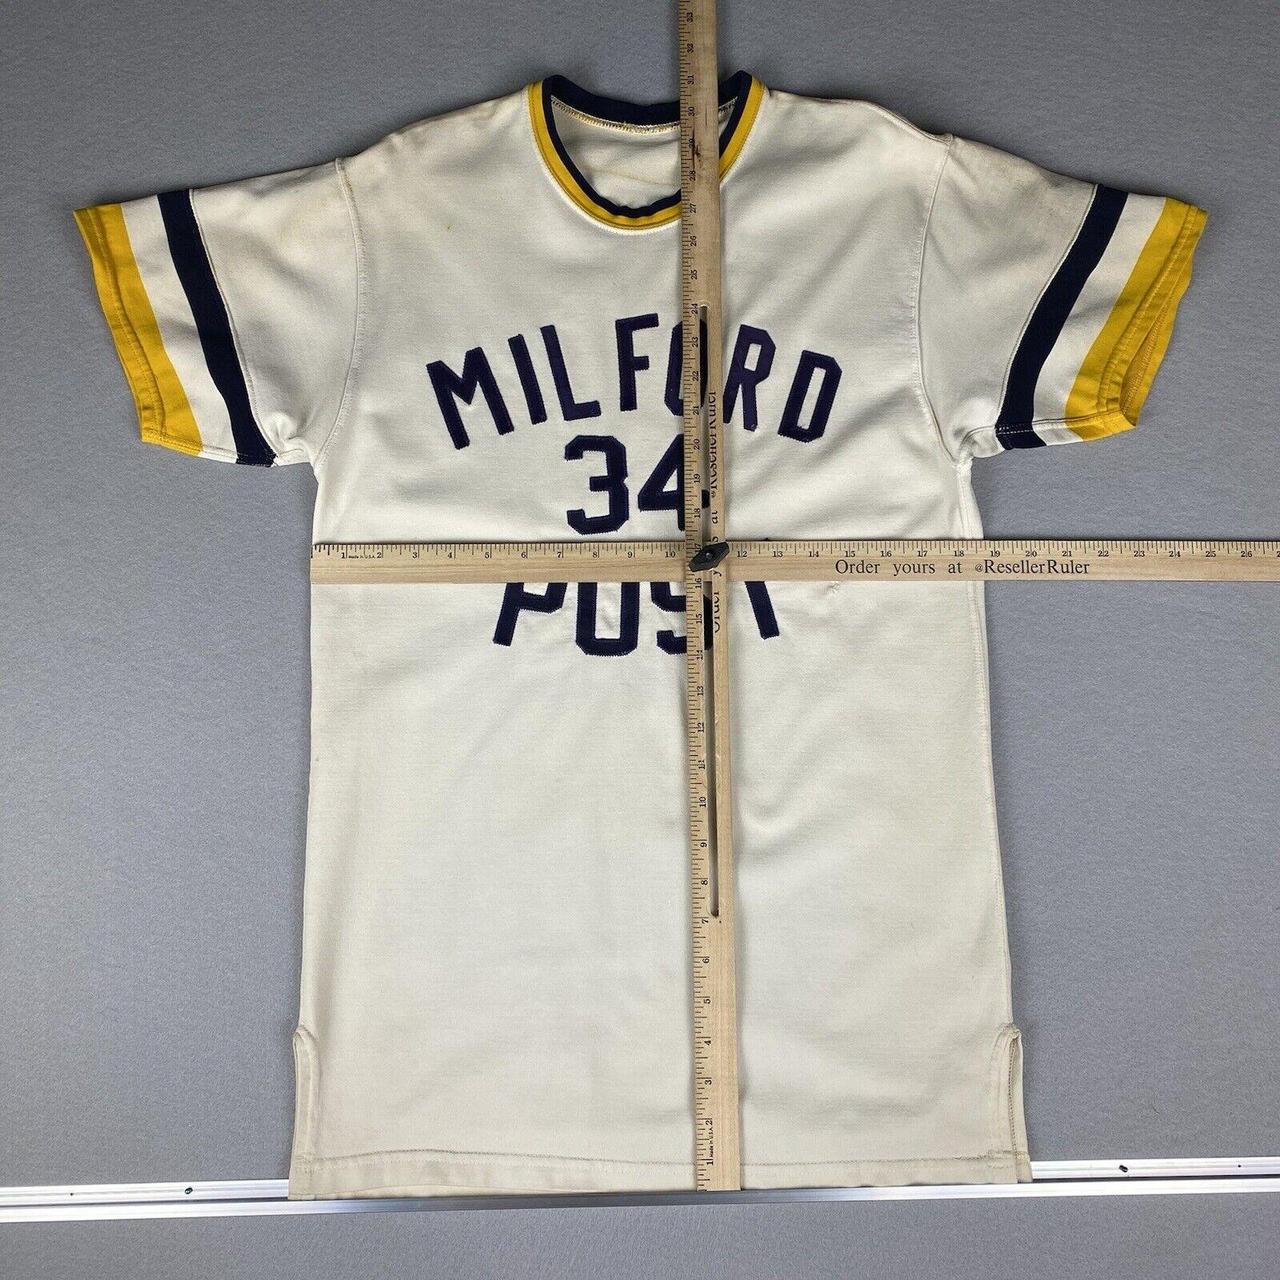 Product Image 3 - Vintage Milford Post #34 Jersey